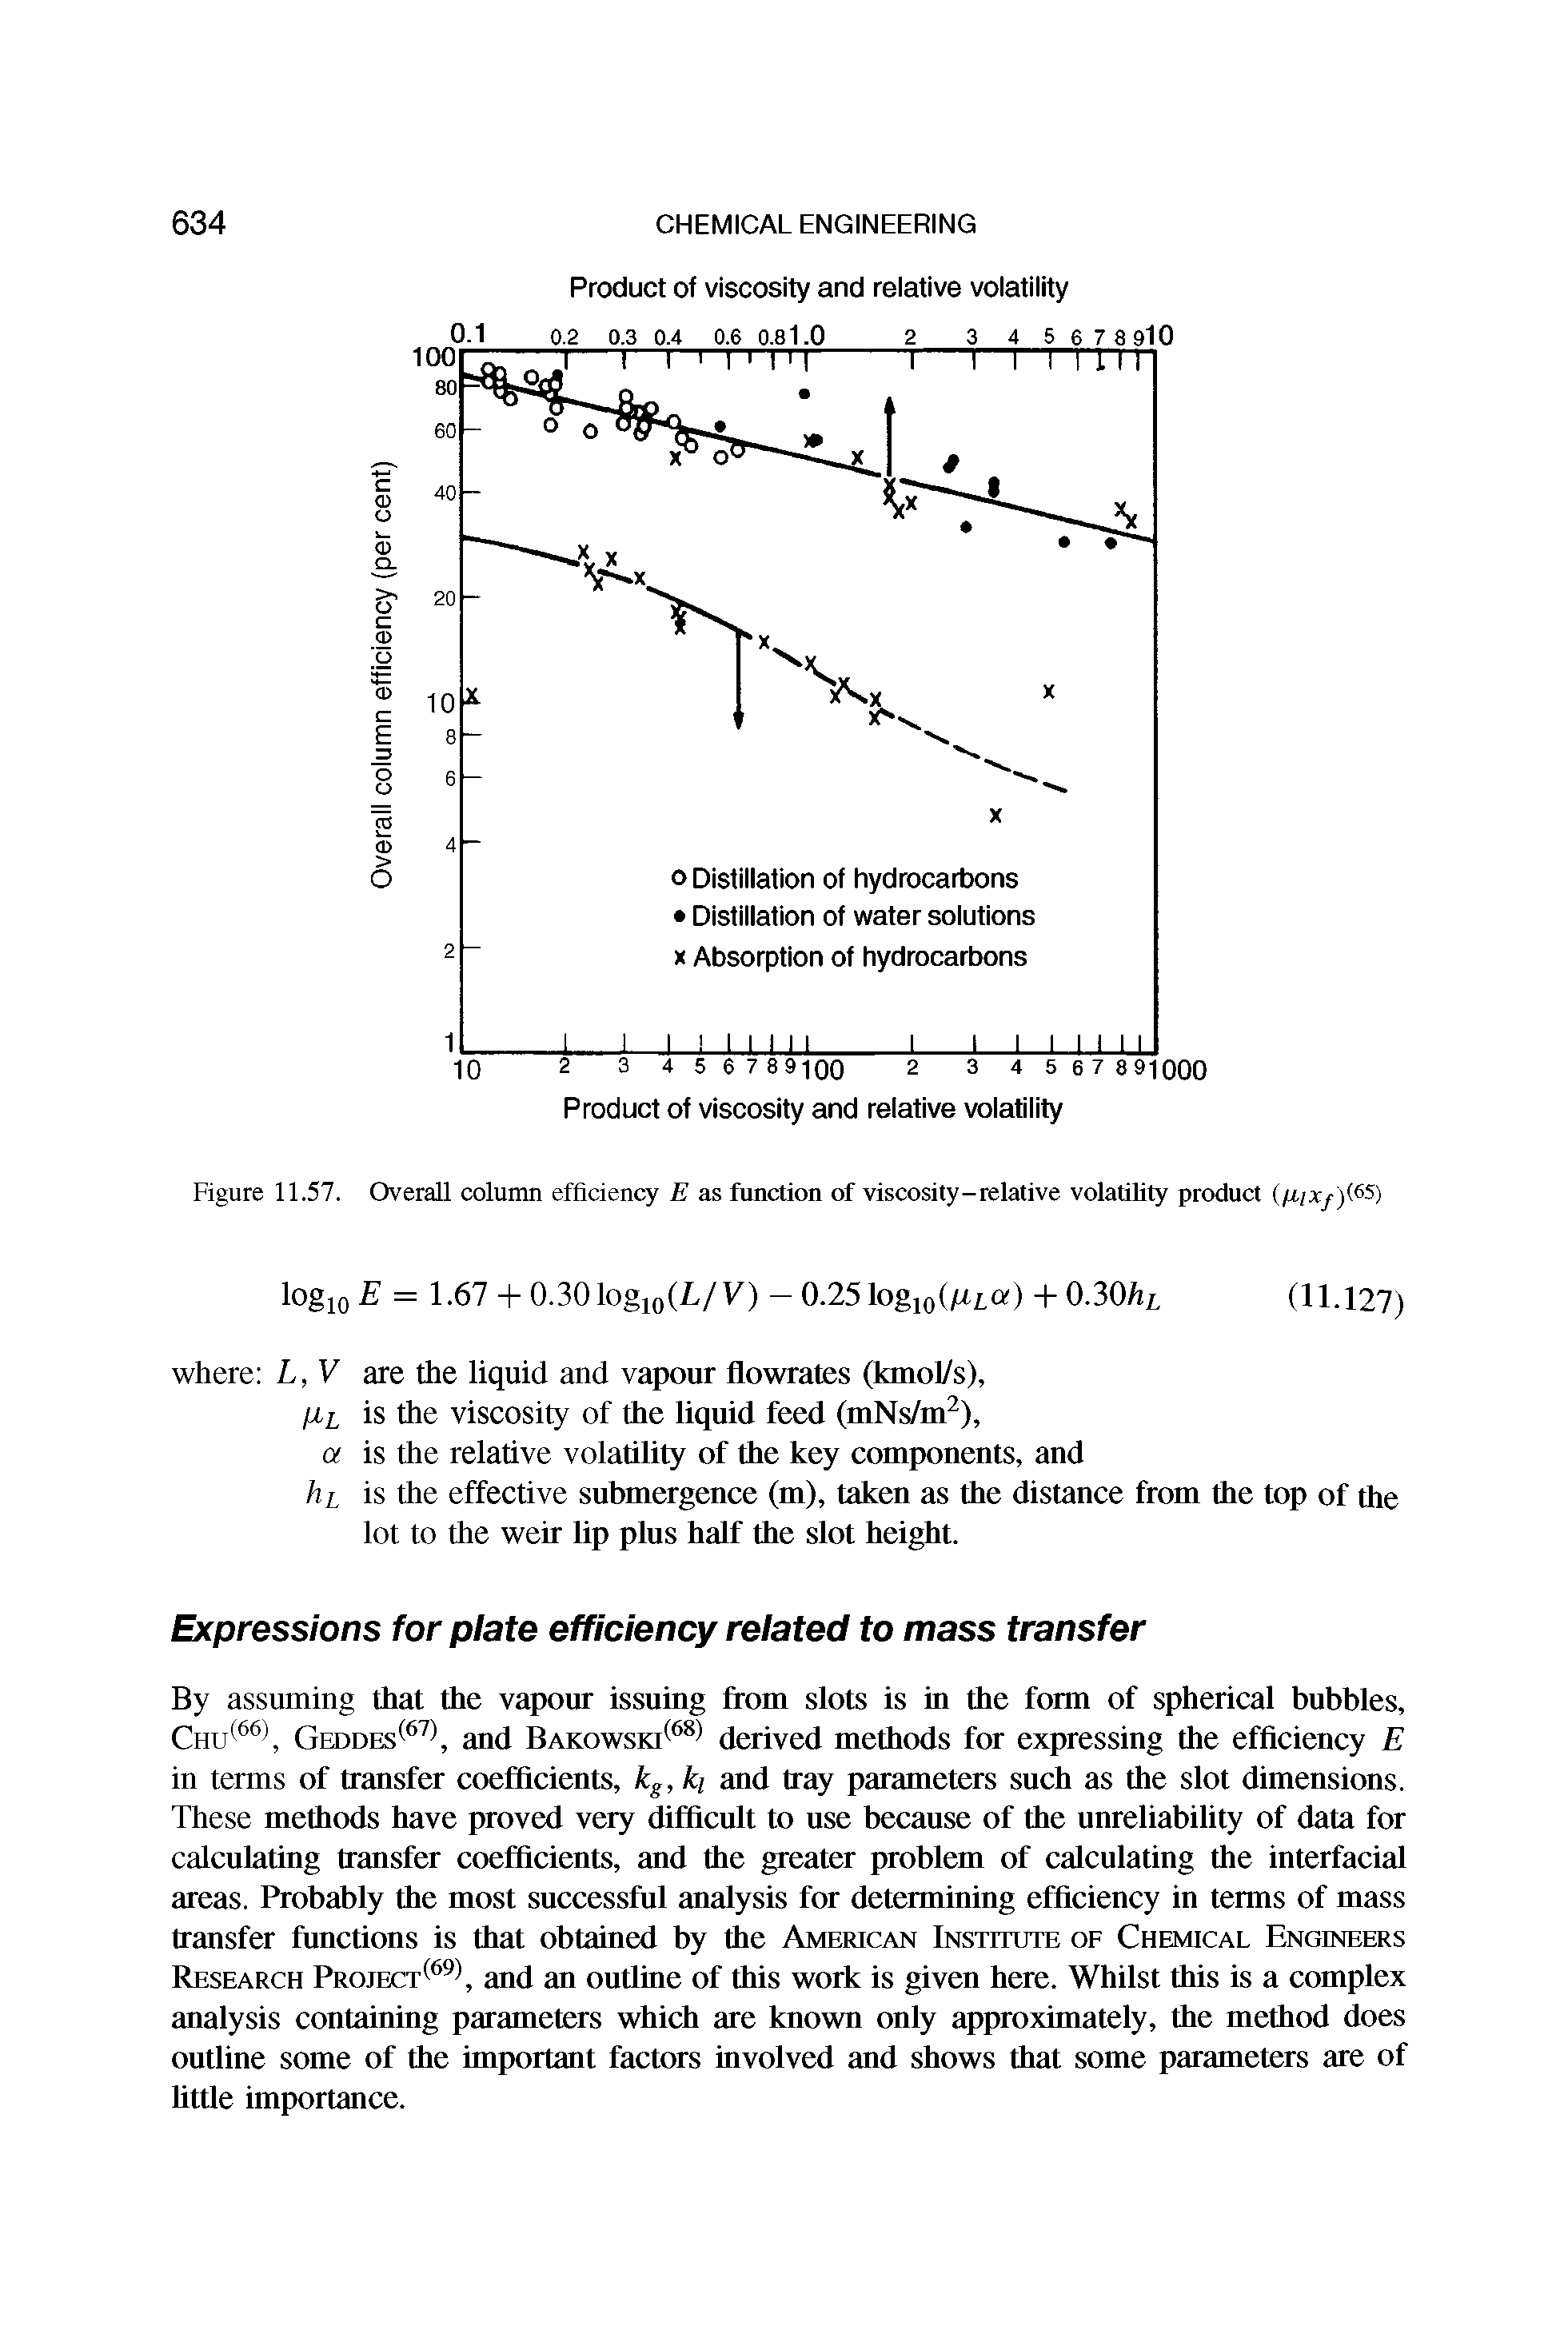 Figure 11.57. Overall column efficiency E as function of viscosity-relative volatility product (fiixf)(65)...